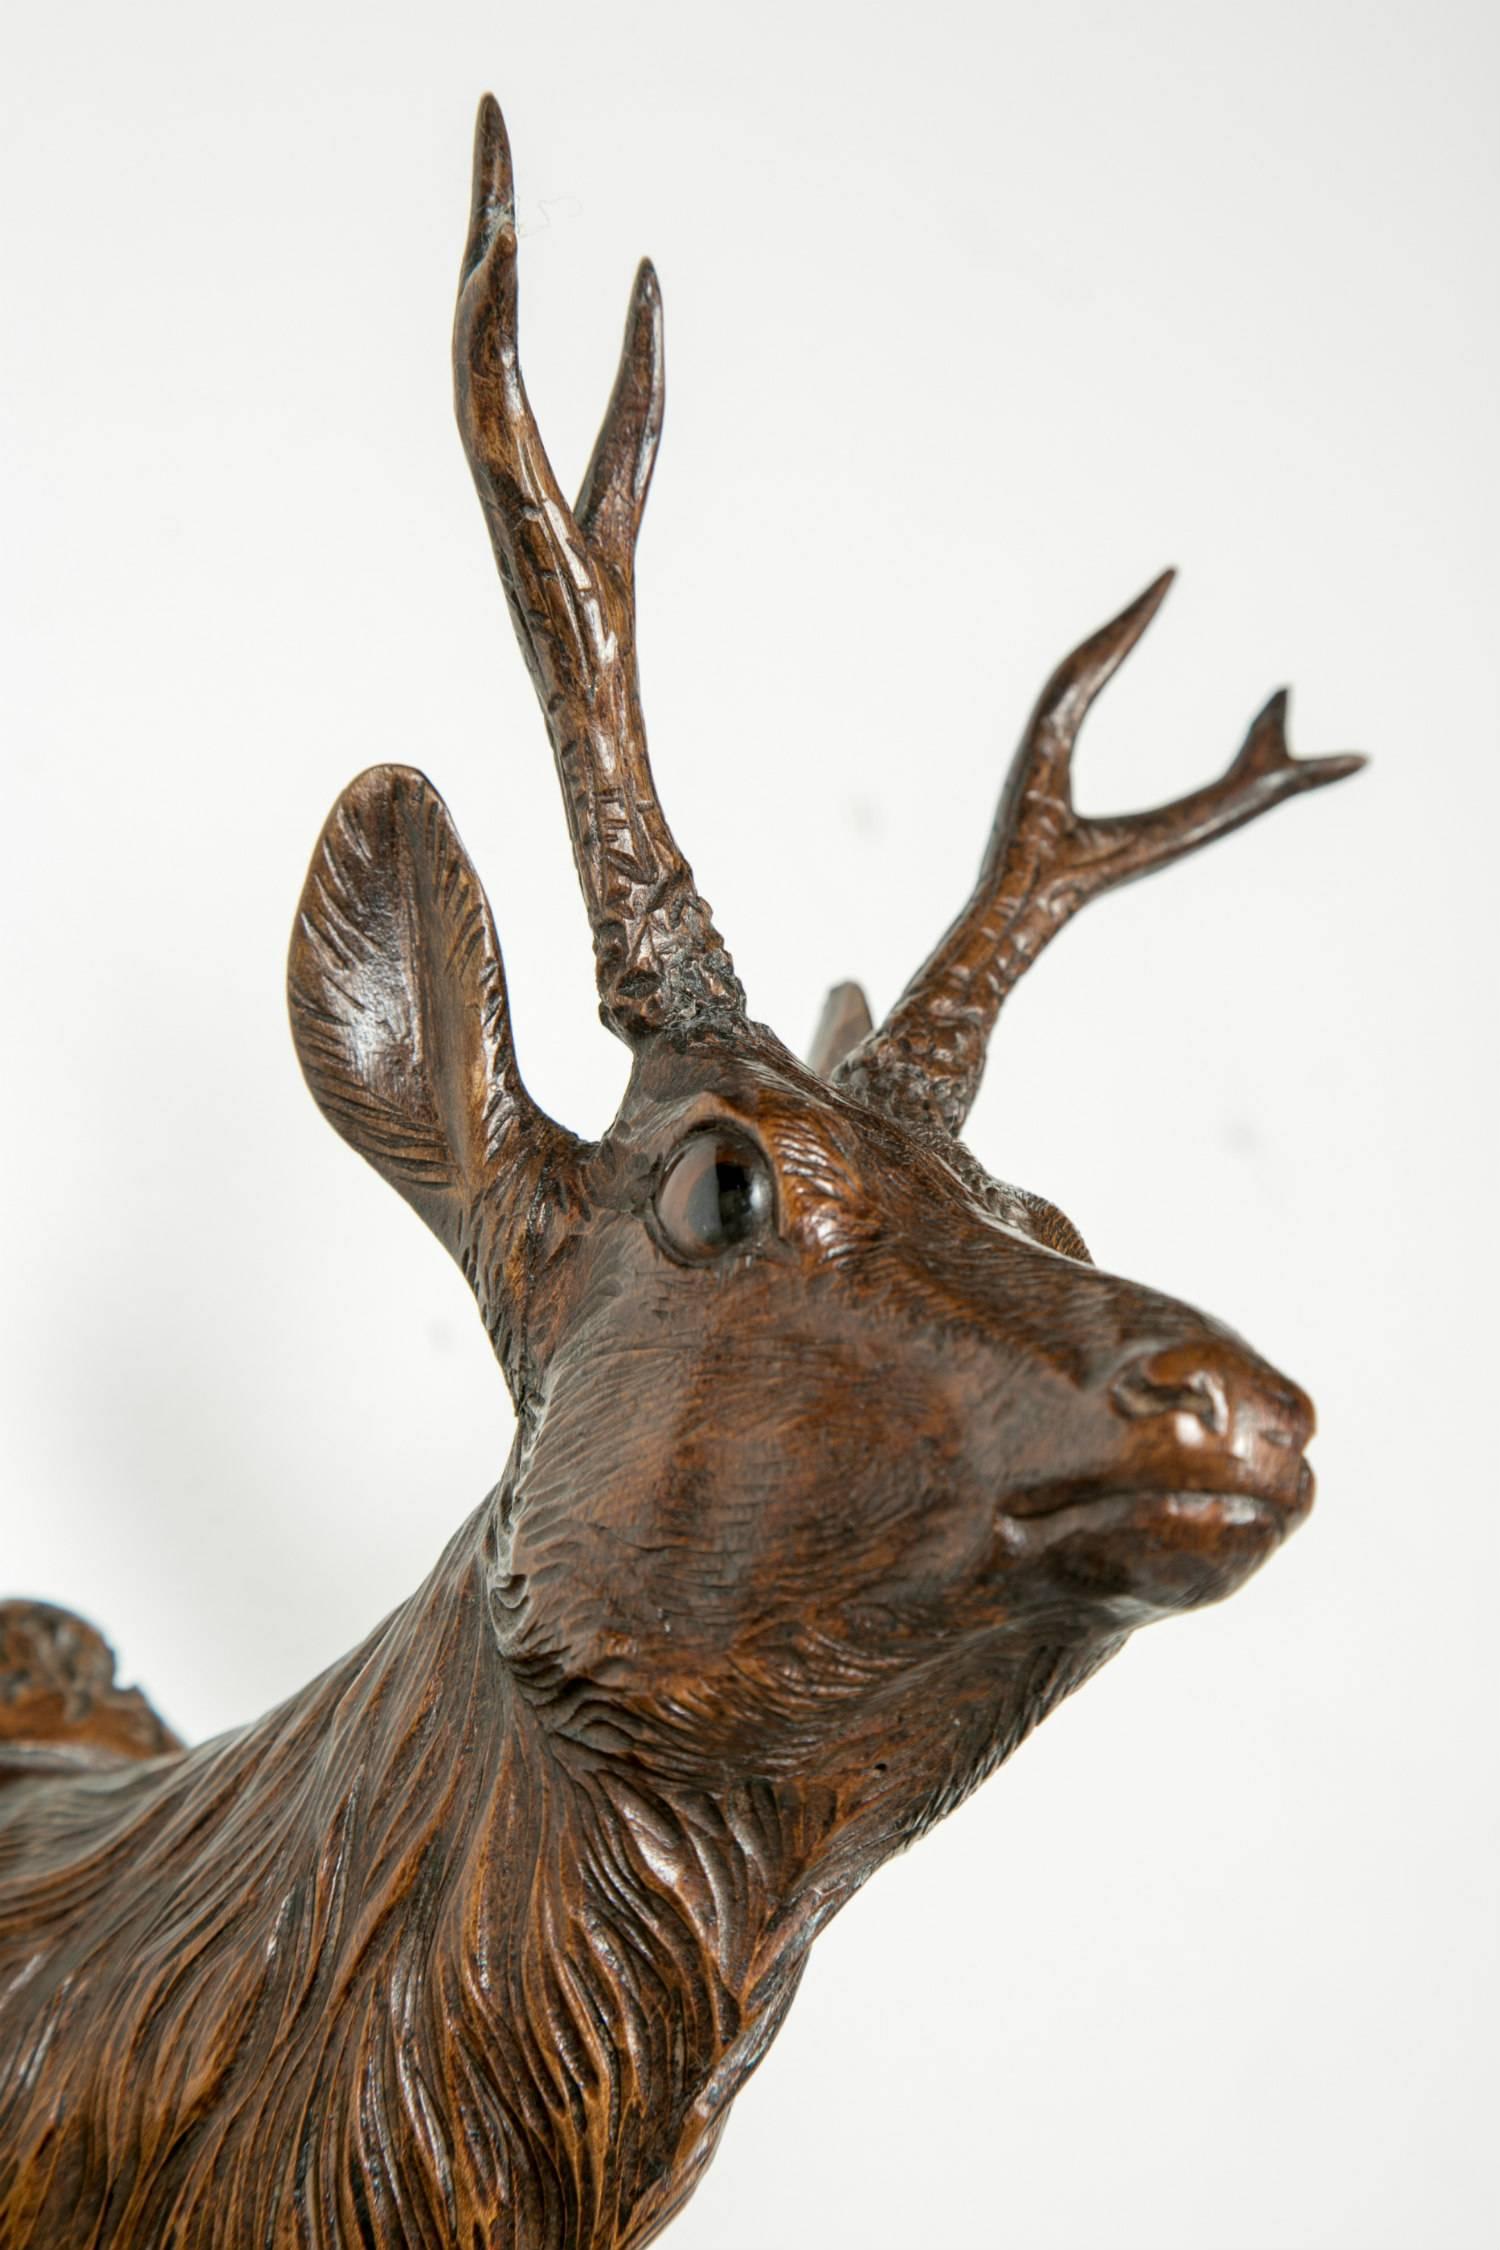 Intricately carved solid walnut Black Forest stag head gun rack having a beautifully carved stag's head at the top with glass eyes. The sides feature a total of six carved pegs as well as typical Black Forest leaf and vine carvings. This is a very